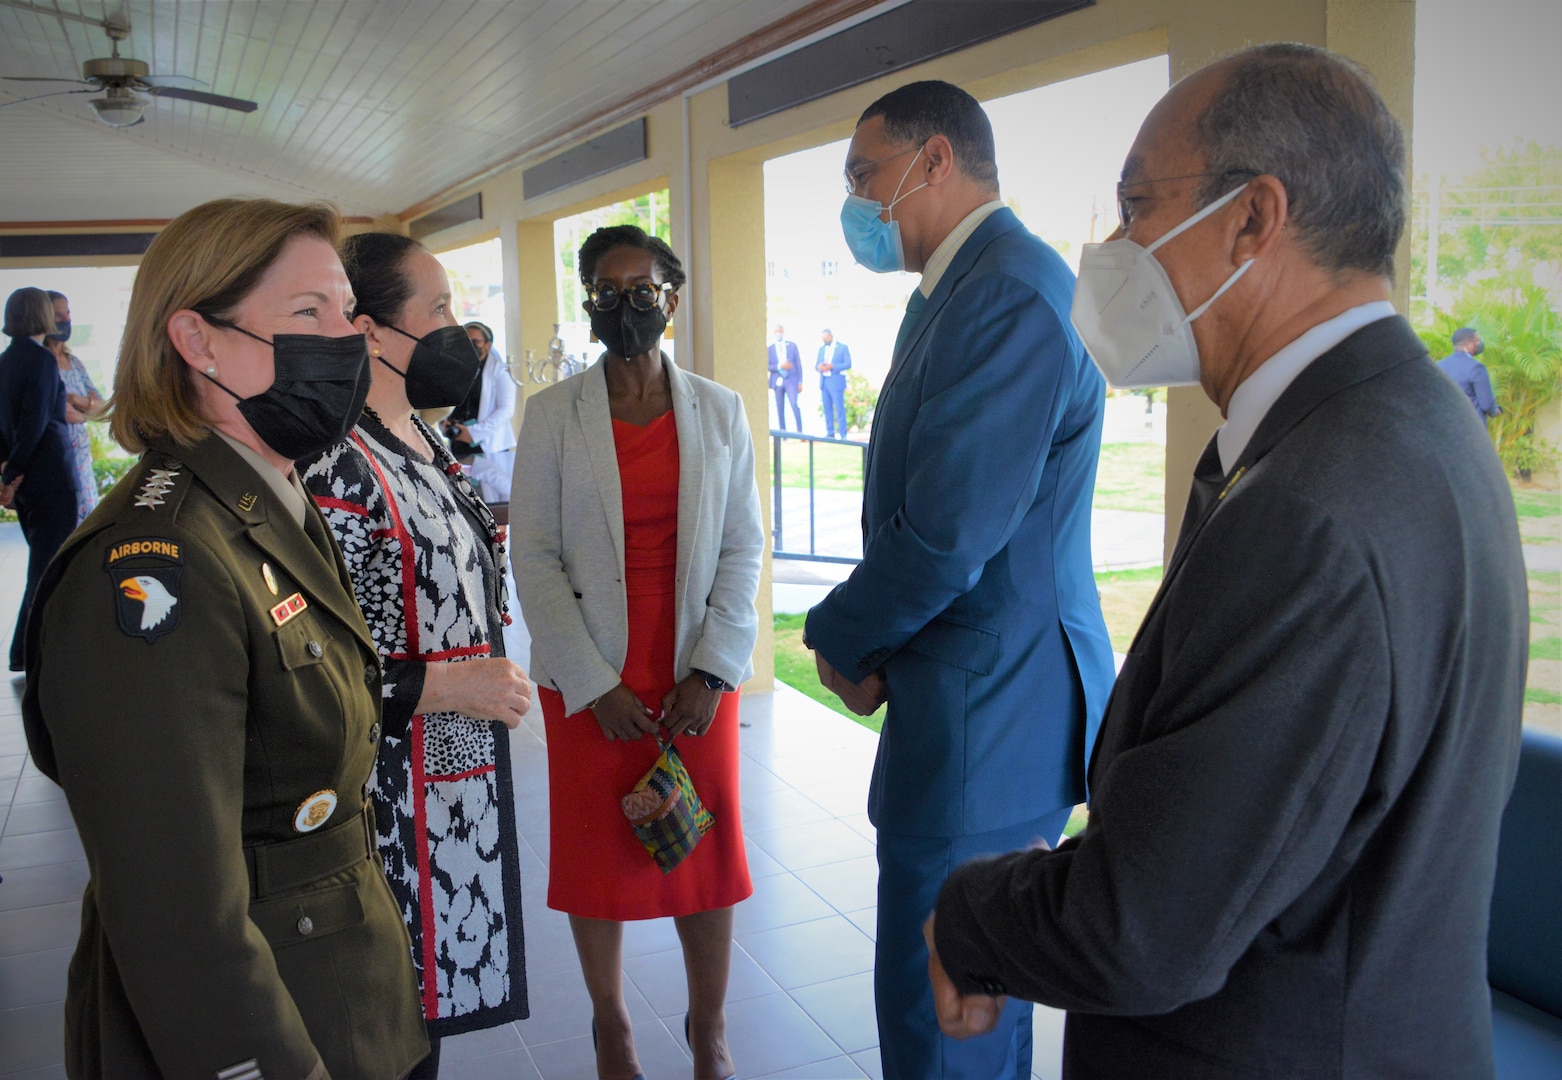 he commander of U.S. Southern Command, U.S. Army Gen. Laura Richardson, speaks with Jamaican Deputy Prime Minister and Minister of National Security, Dr. Horace Chang.